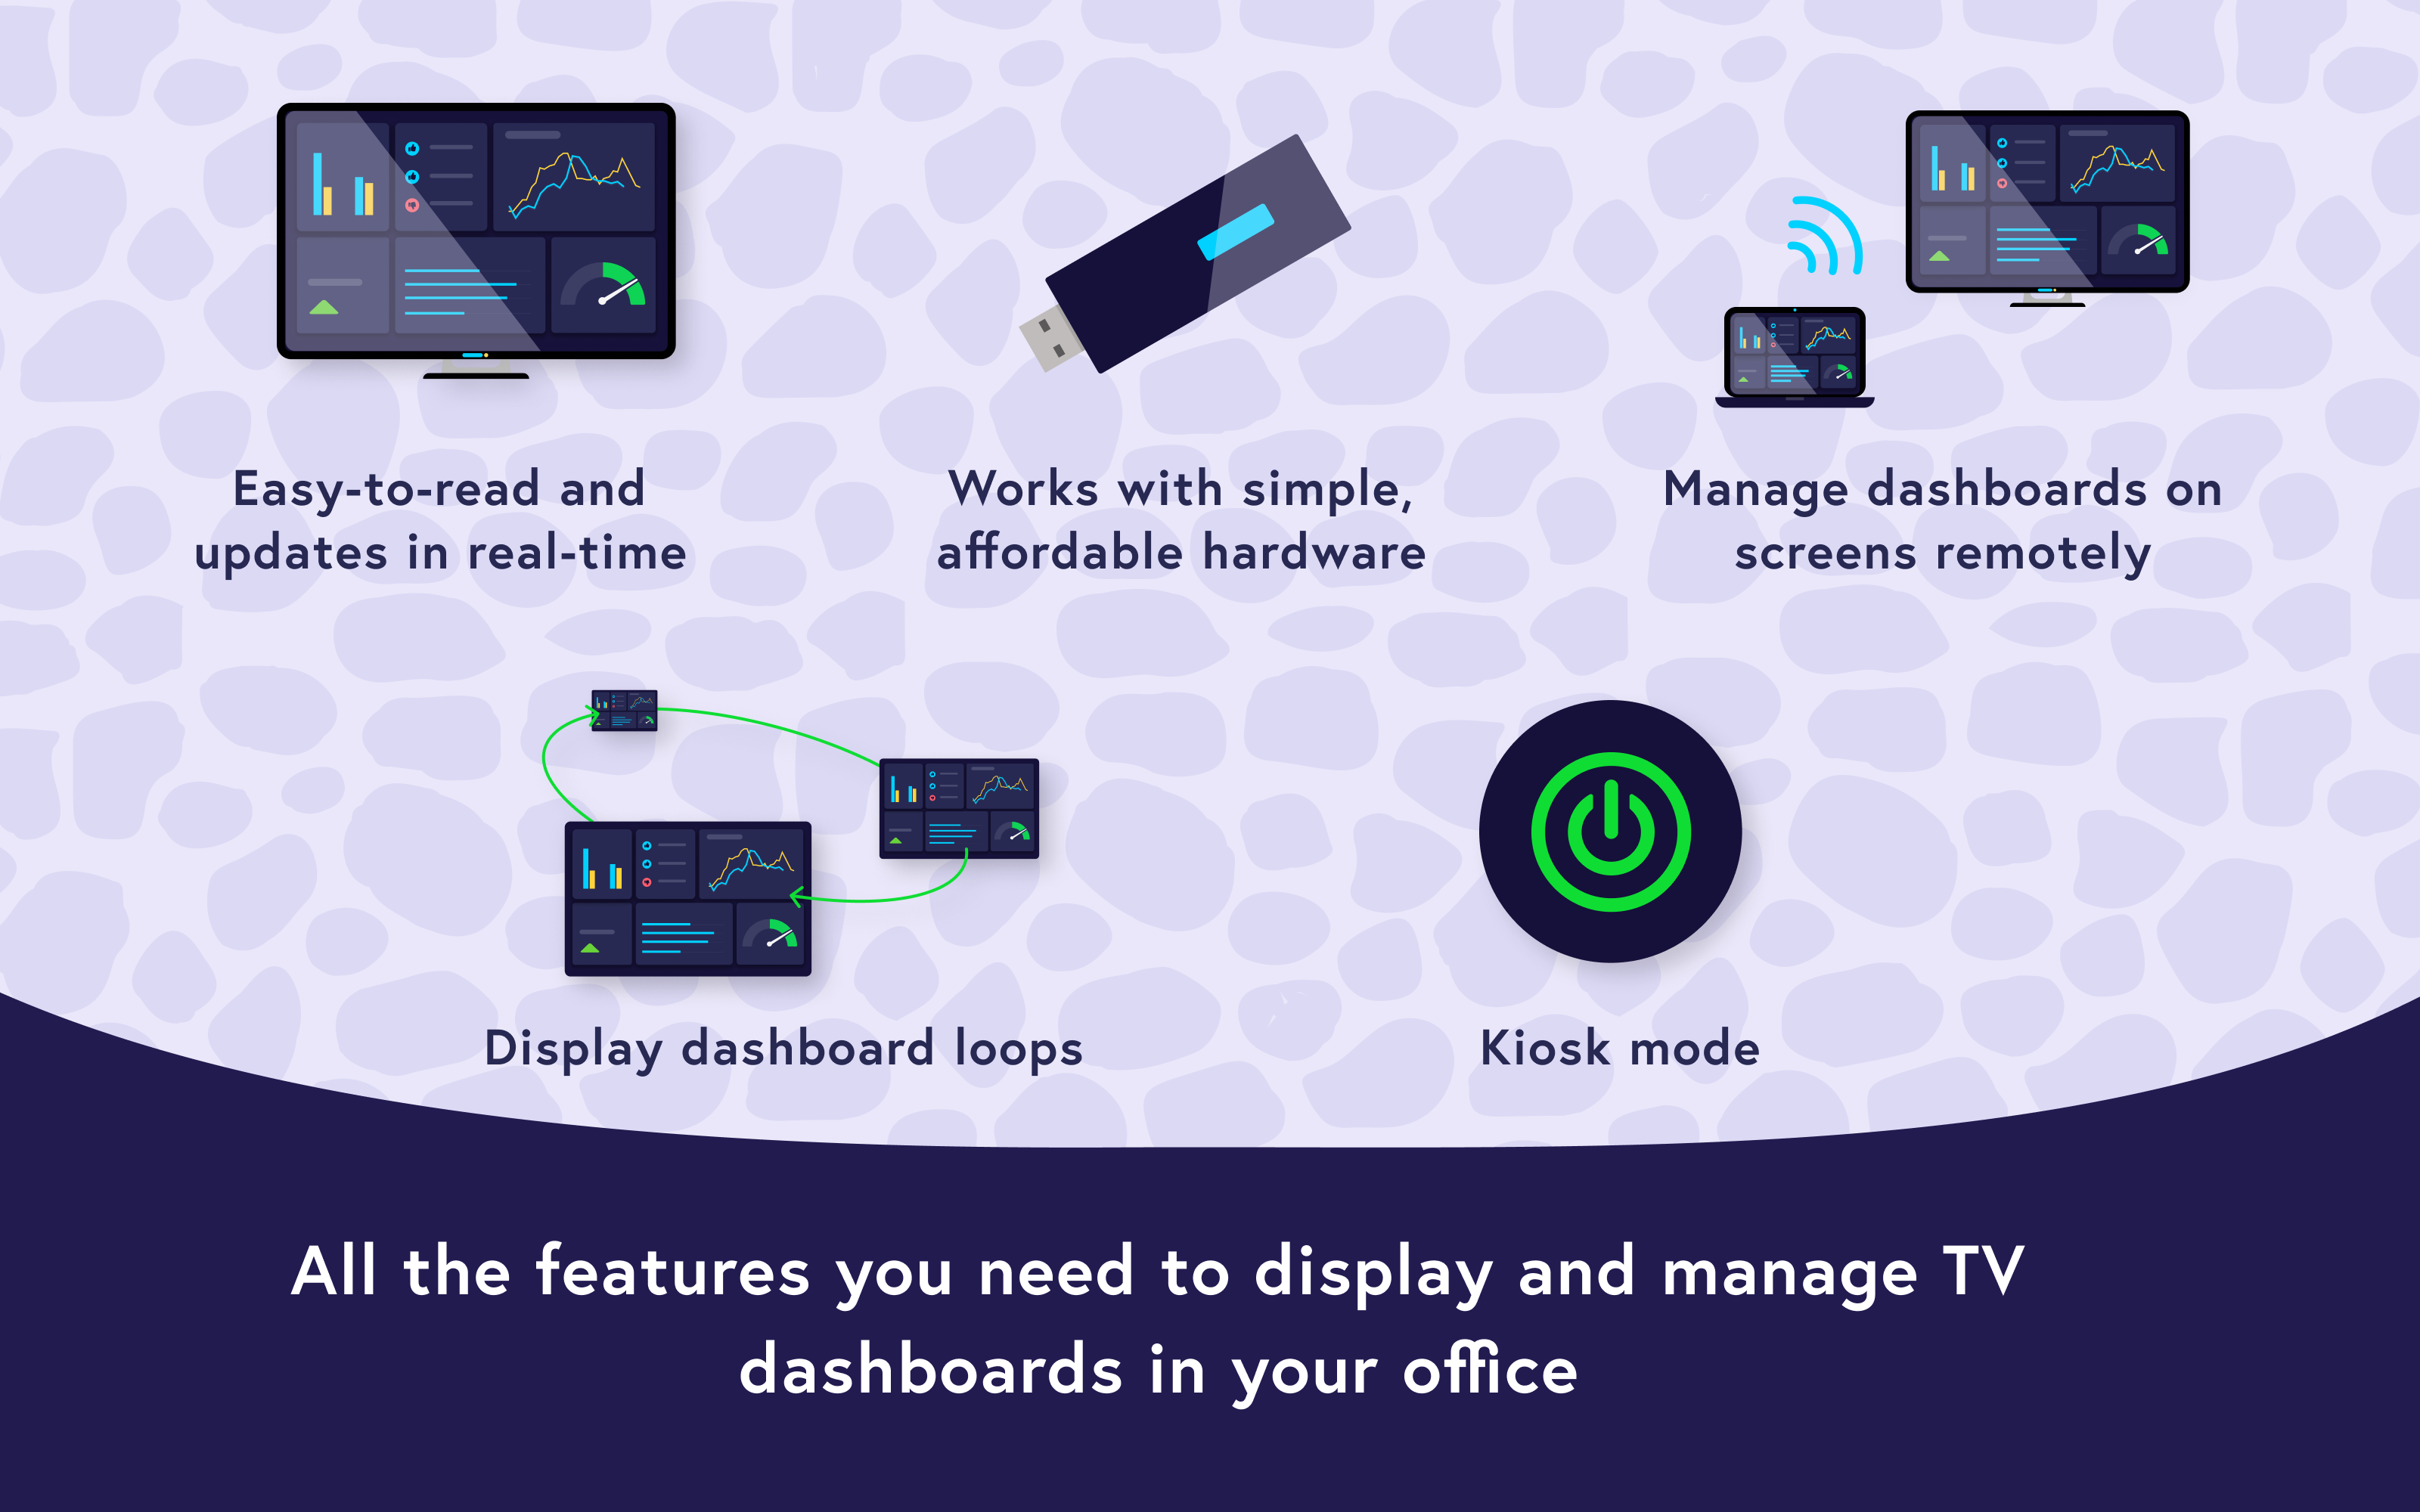 All the features you need to display and manage TV dashboards in your office